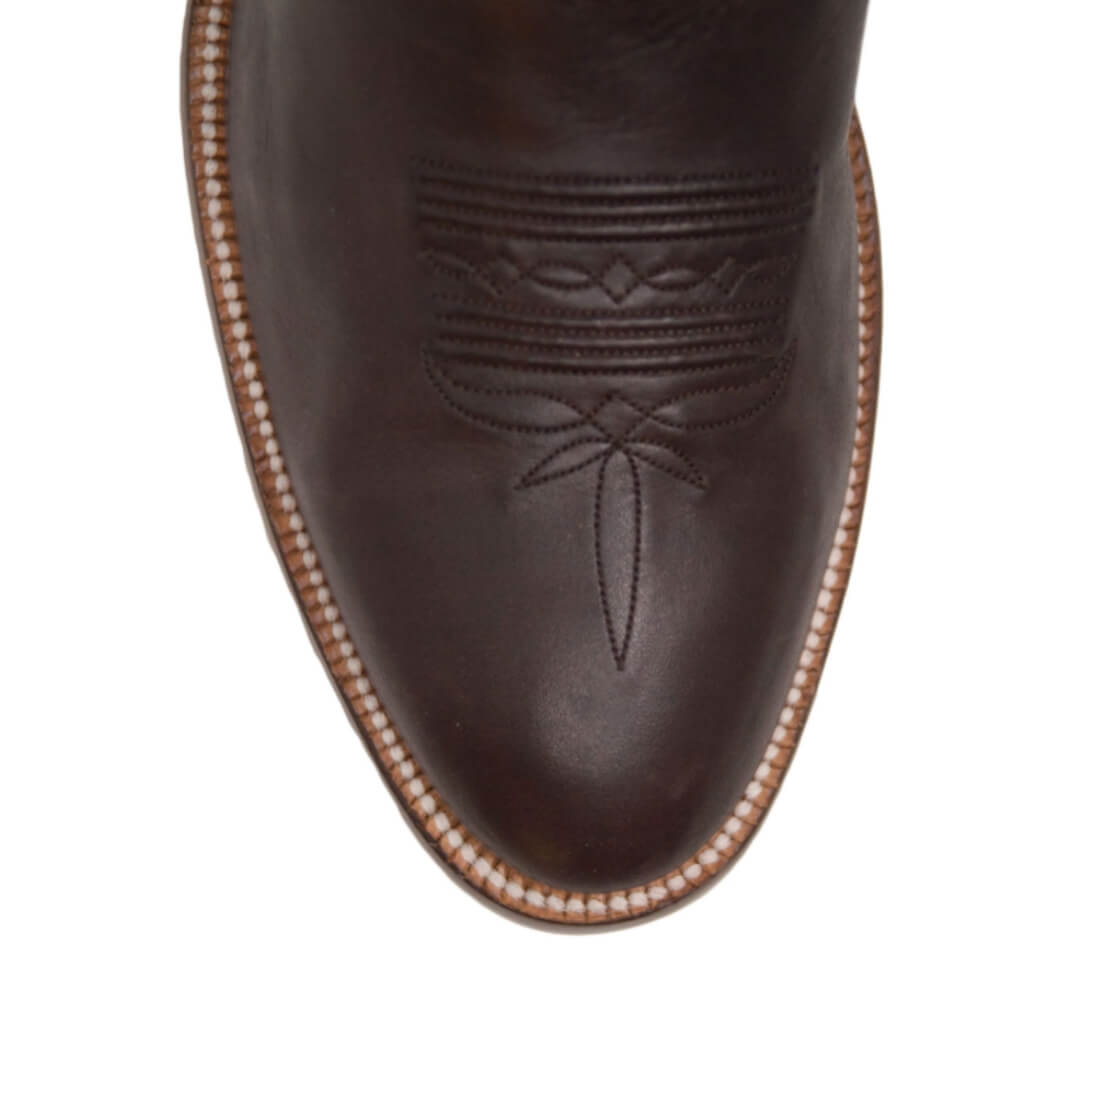 CITY Boots The Taylor Men's Brown Leather Cowboy Boots 